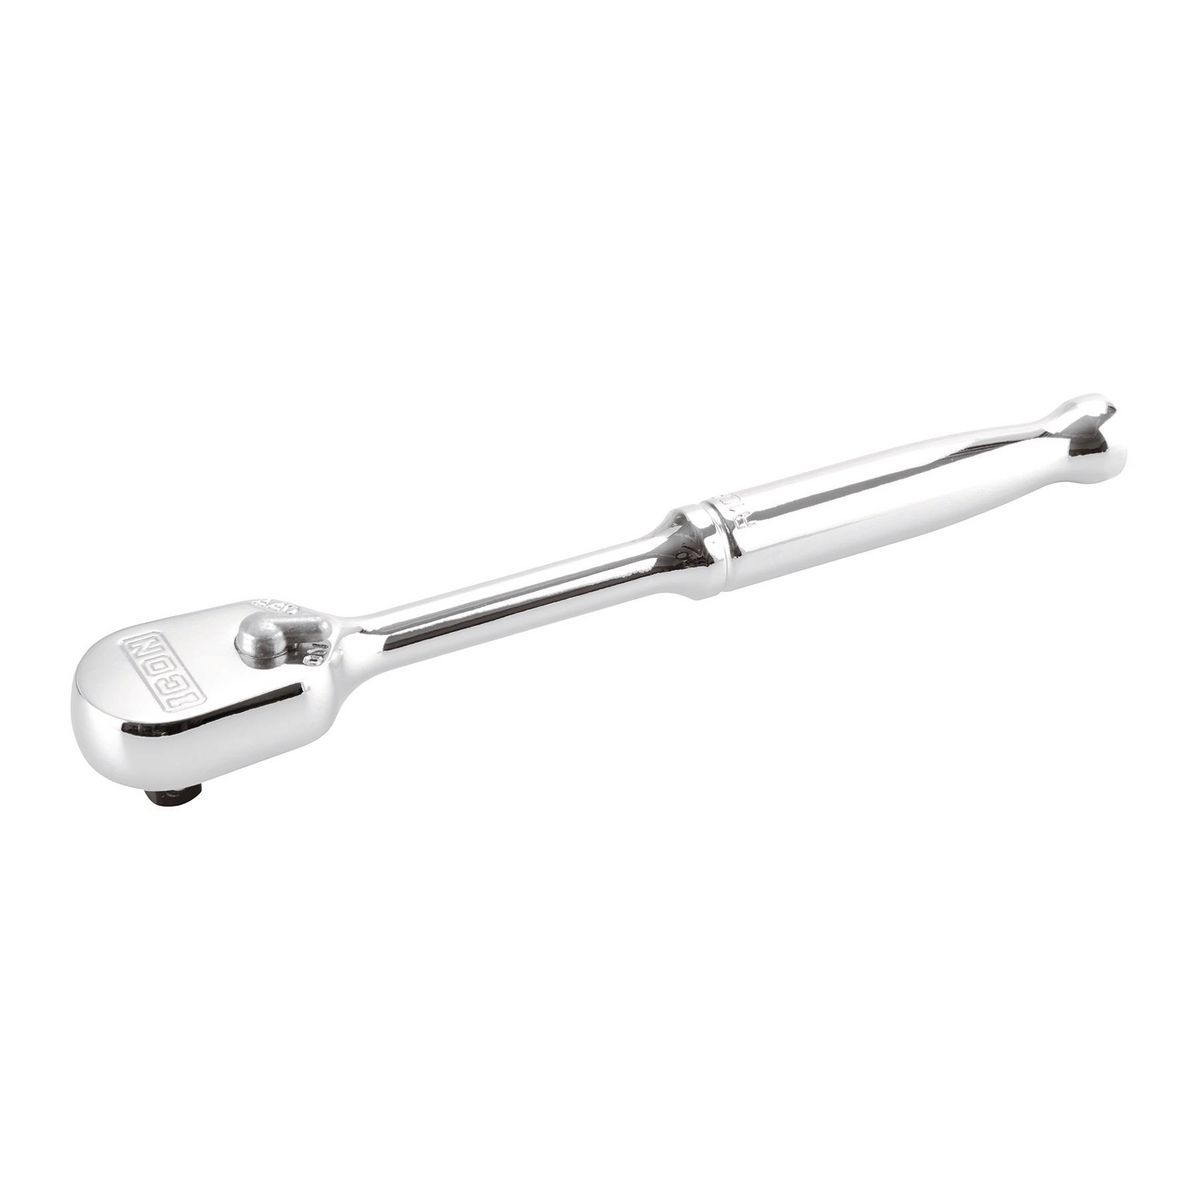 ICON 1/4 in. Drive Professional Low-Profile Ratchet